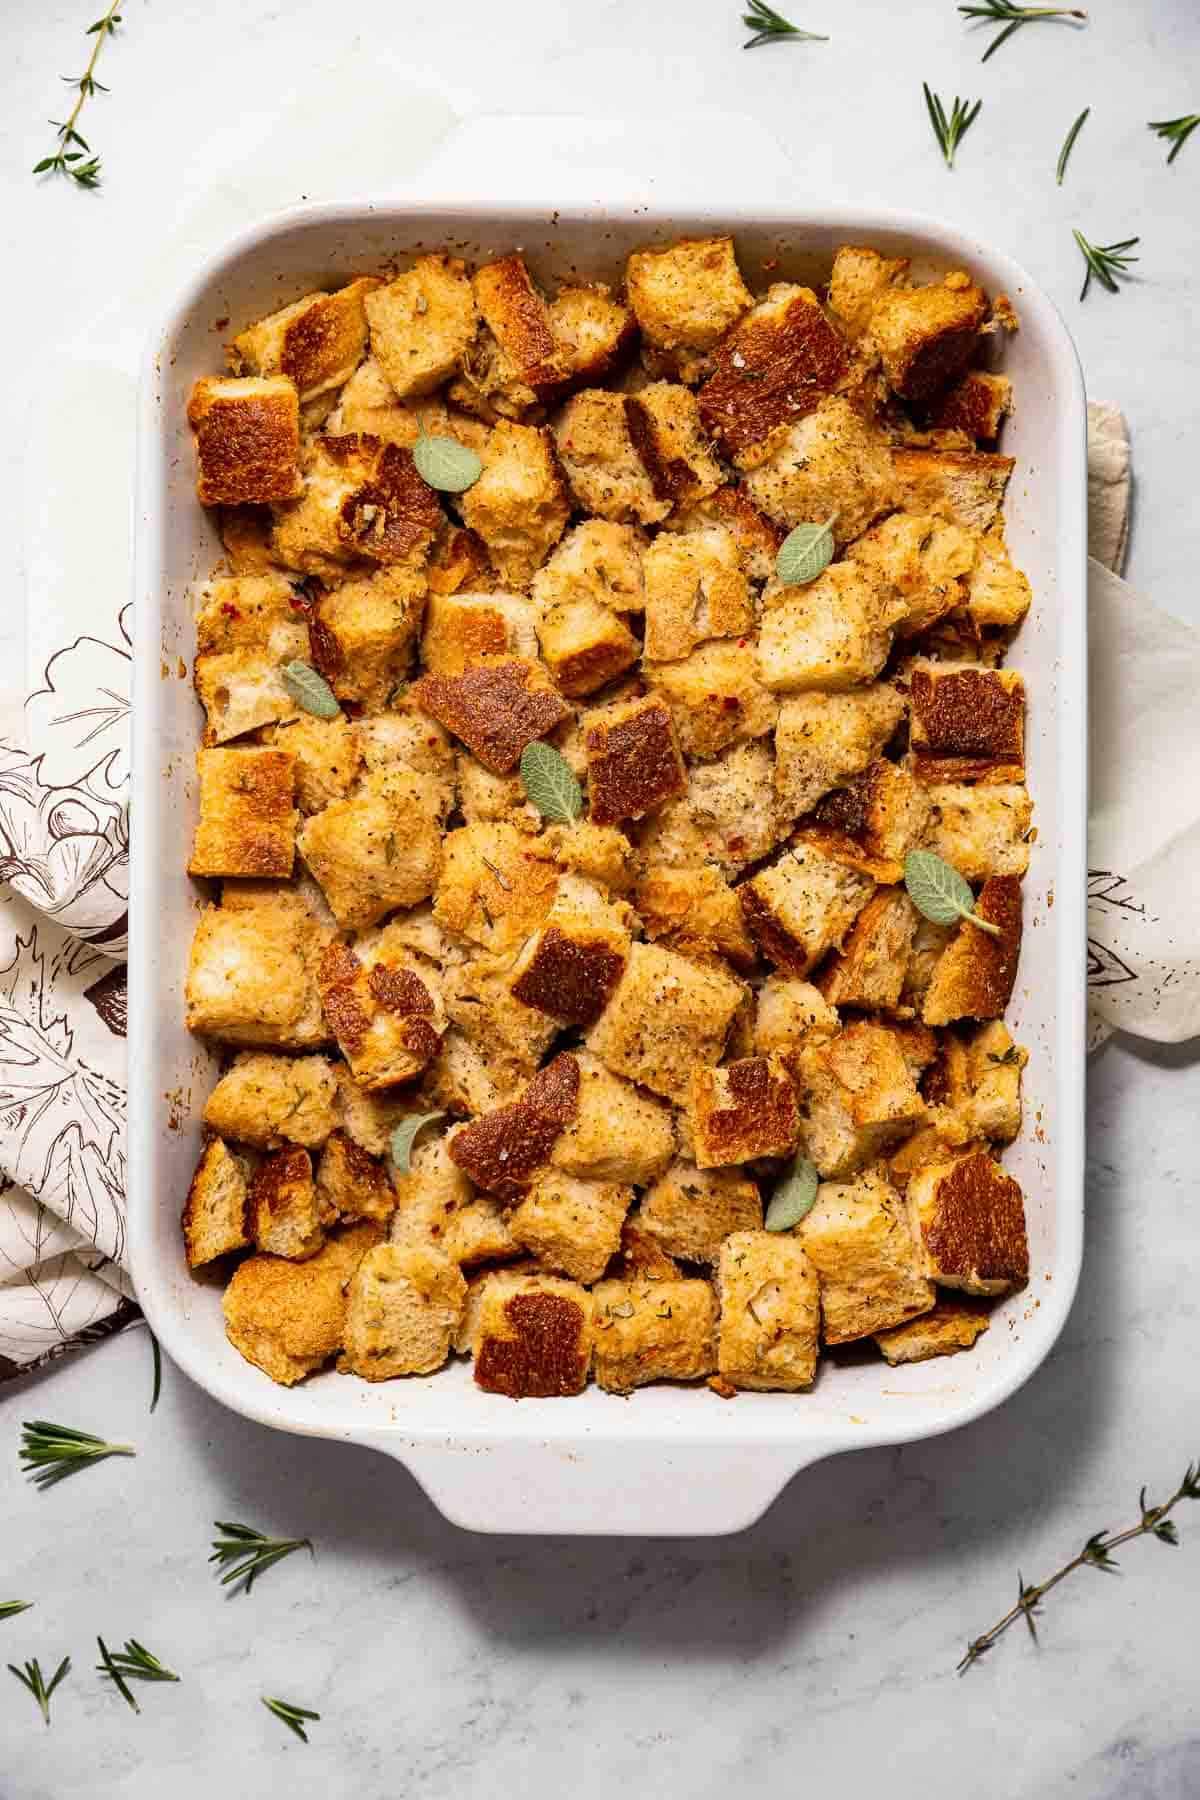 A 9x13 baking dish filled with simple baked sourdough stuffing with fresh herbs, a vegan Thanksgiving recipe.